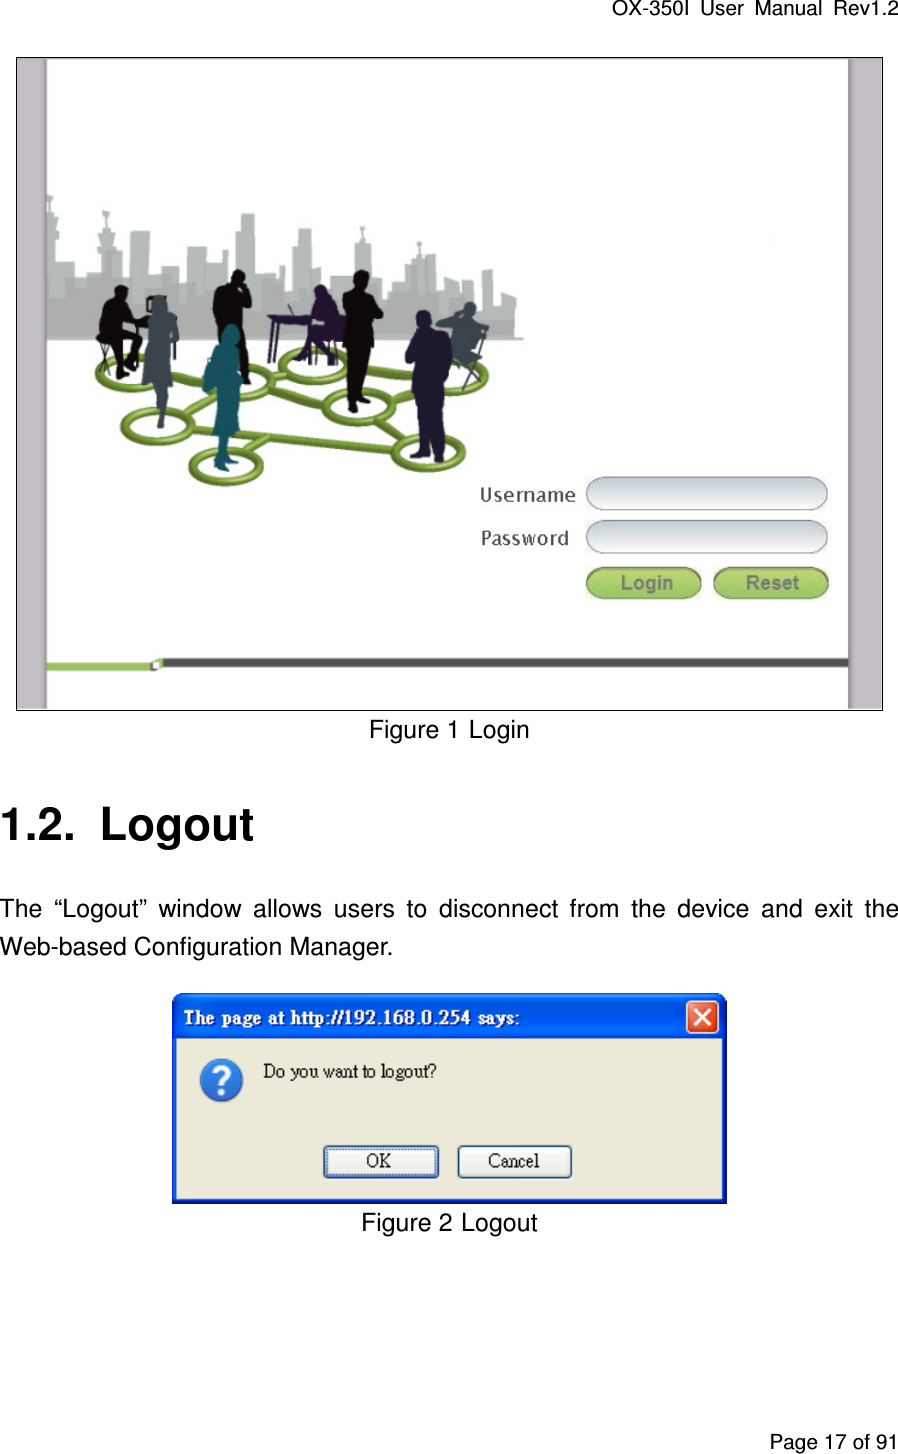 OX-350I  User  Manual  Rev1.2 Page 17 of 91  Figure 1 Login 1.2.  Logout The  “Logout”  window  allows  users  to  disconnect  from  the  device  and  exit  the Web-based Configuration Manager.  Figure 2 Logout 